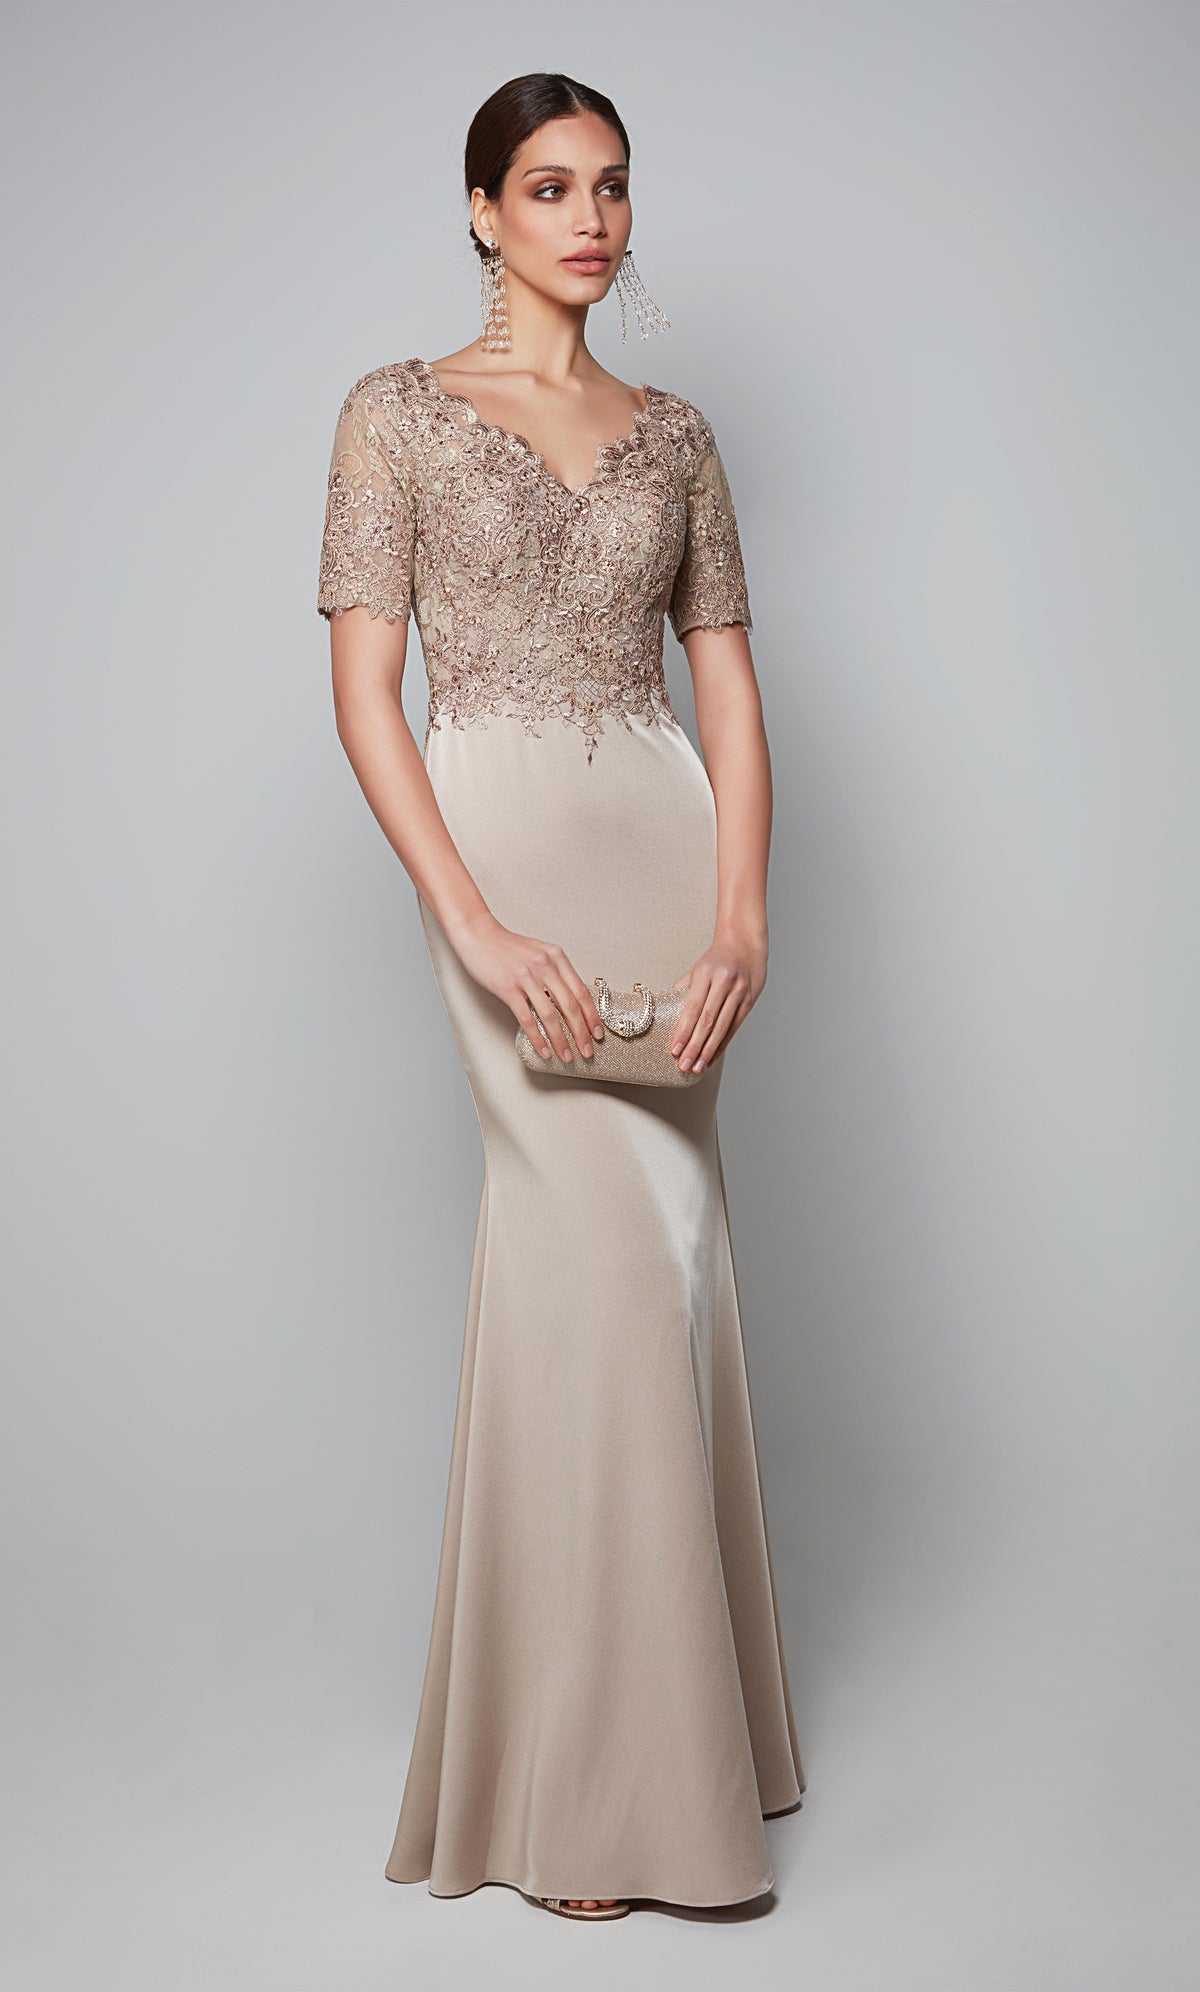 Stretch crepe formal gown with sleeves and a lace bodice in light tan color.